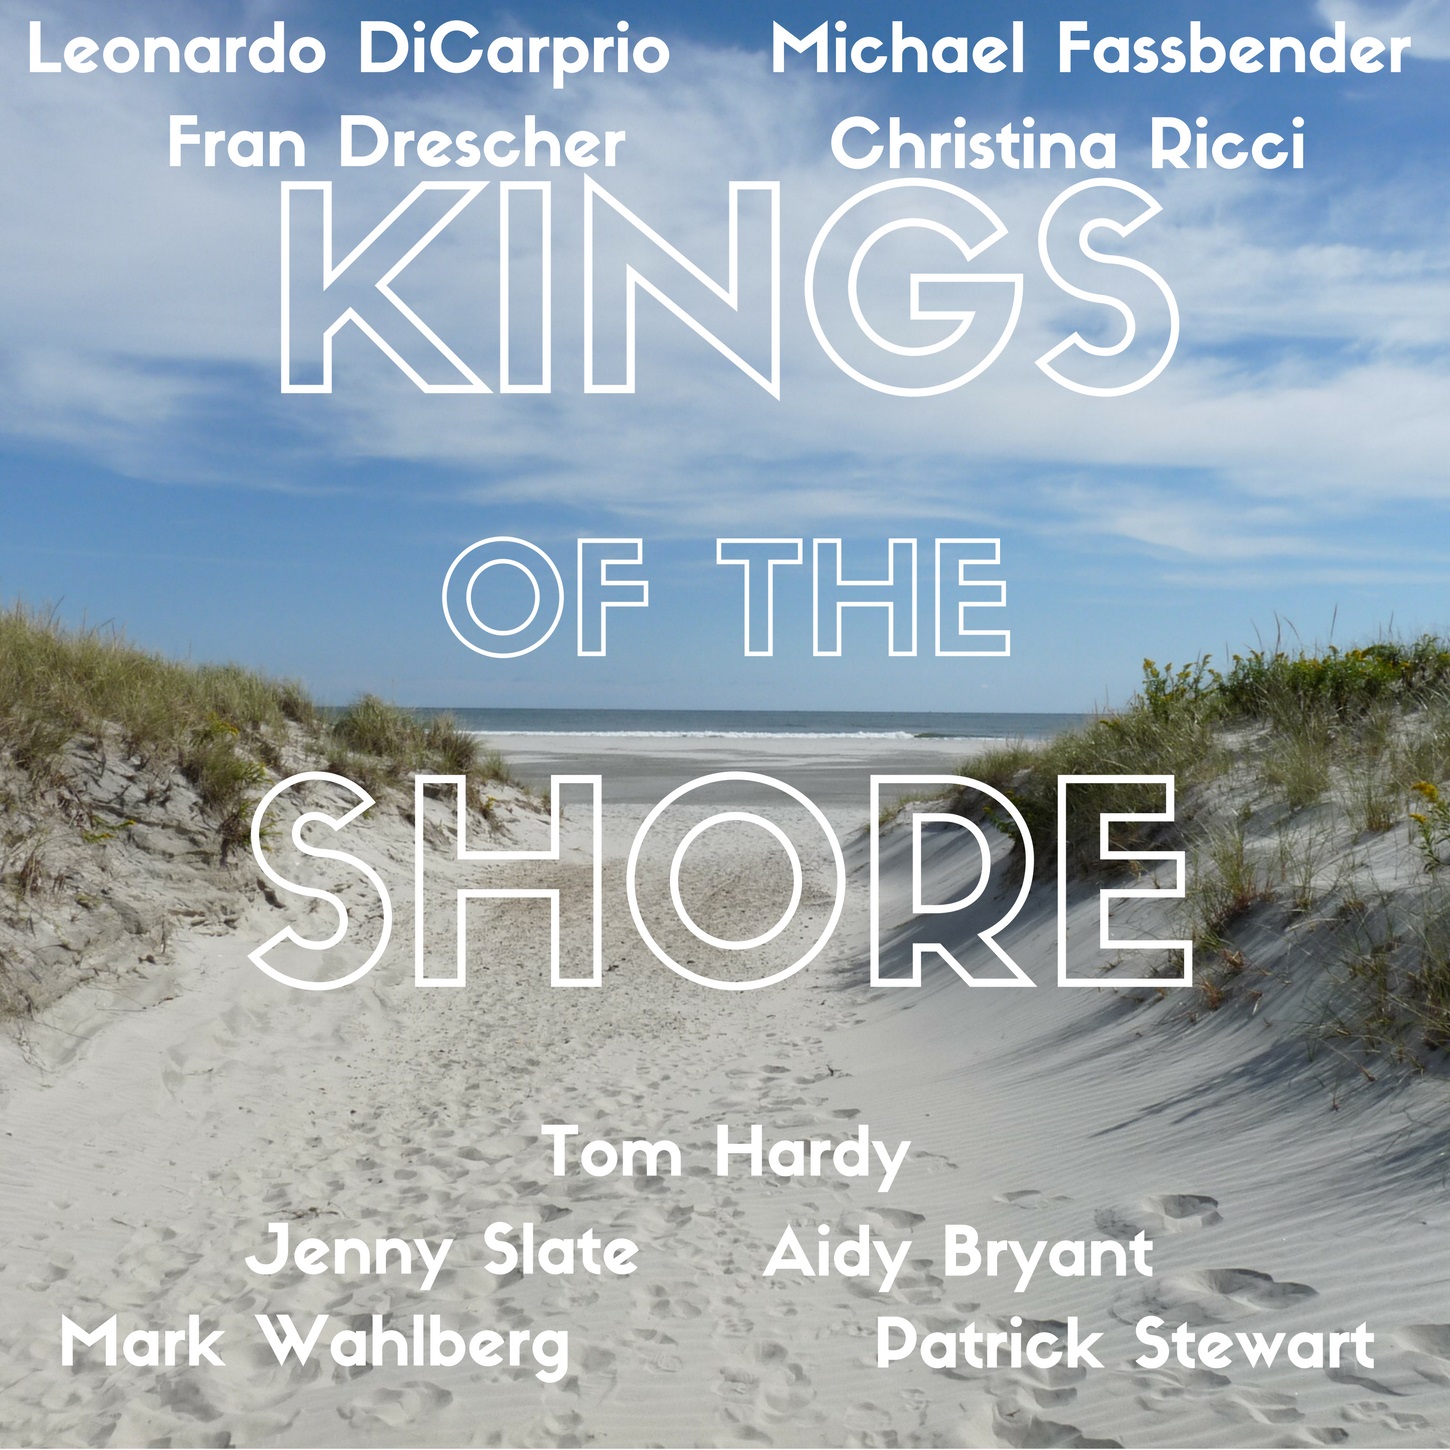 Episode 52 - Kings of the Shore feat. Laura Luttrell